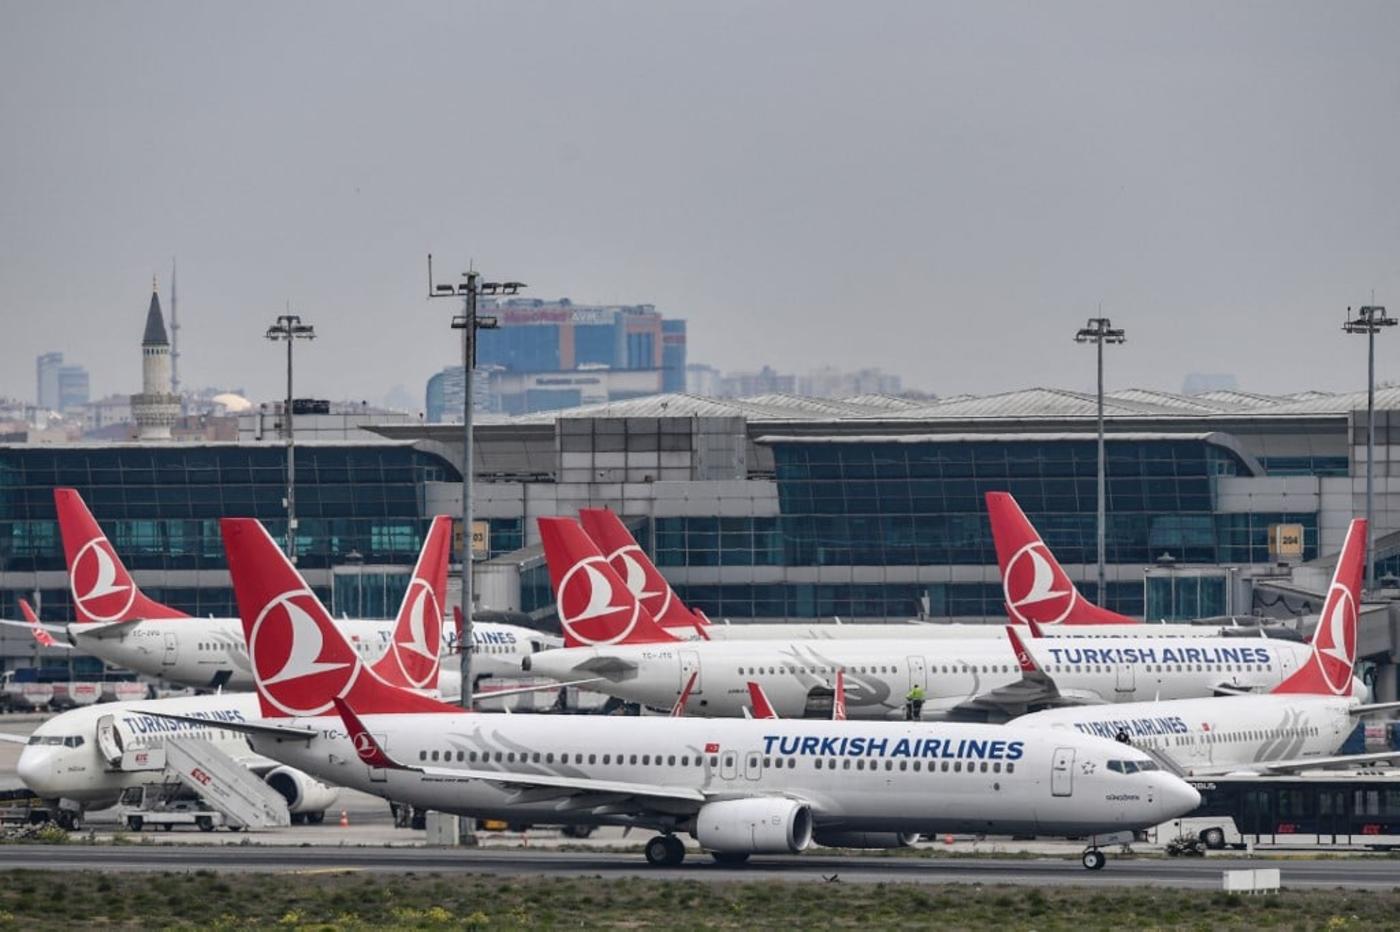 Turkish Airlines planes are pictured on the tarmac of the Ataturk Airport on April 4, 2019, in Istanbul. (AFP)